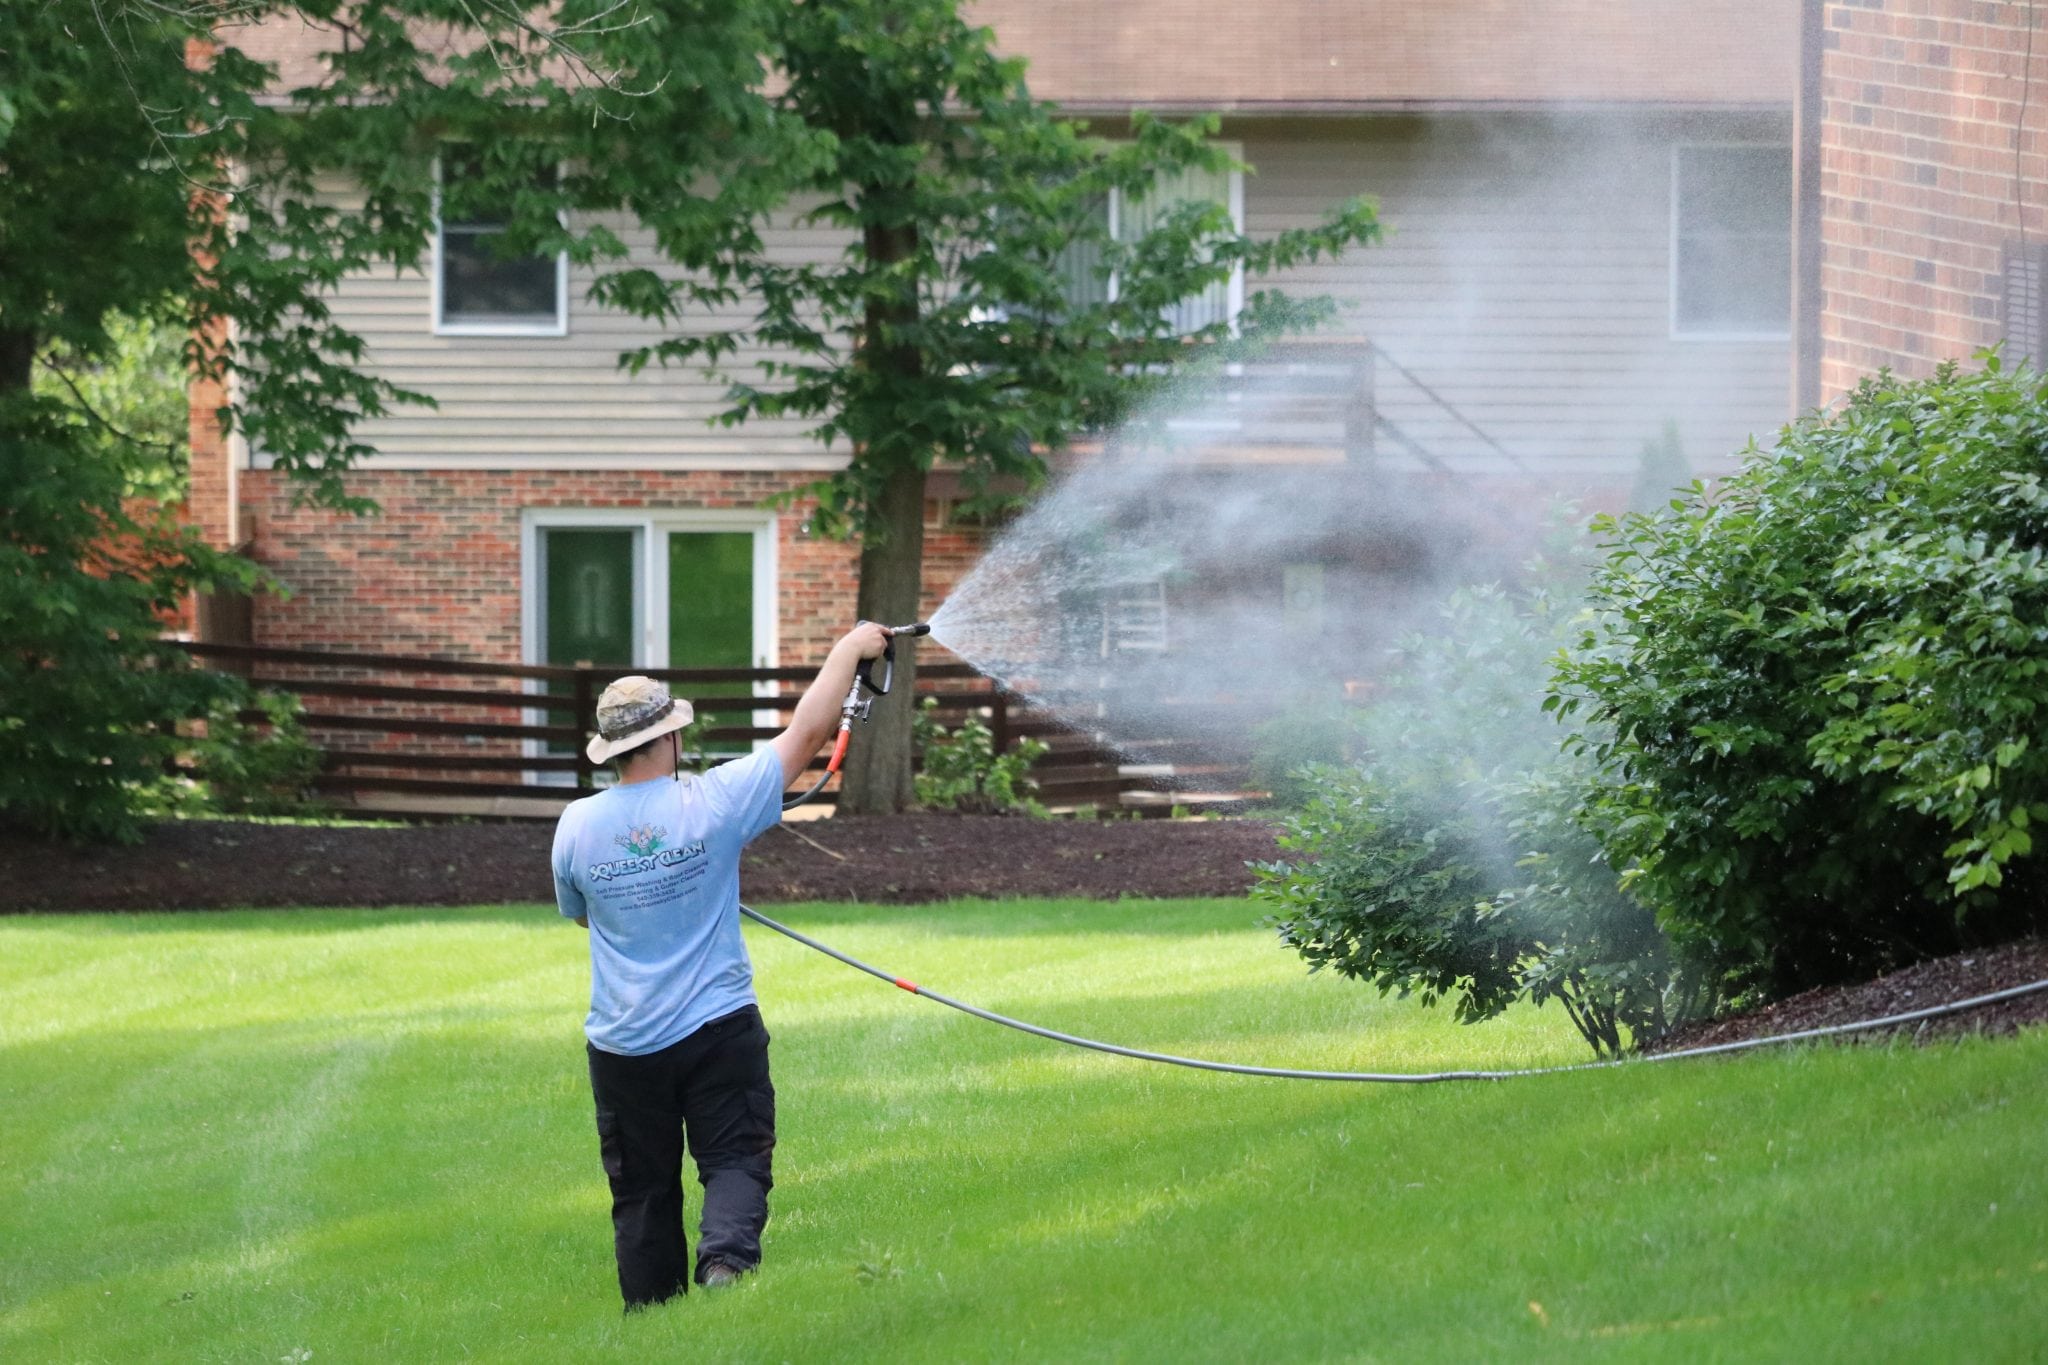 Pressure Washing 101: With or Without Soap? - Welcome to Squeeky Clean Pressure Washing